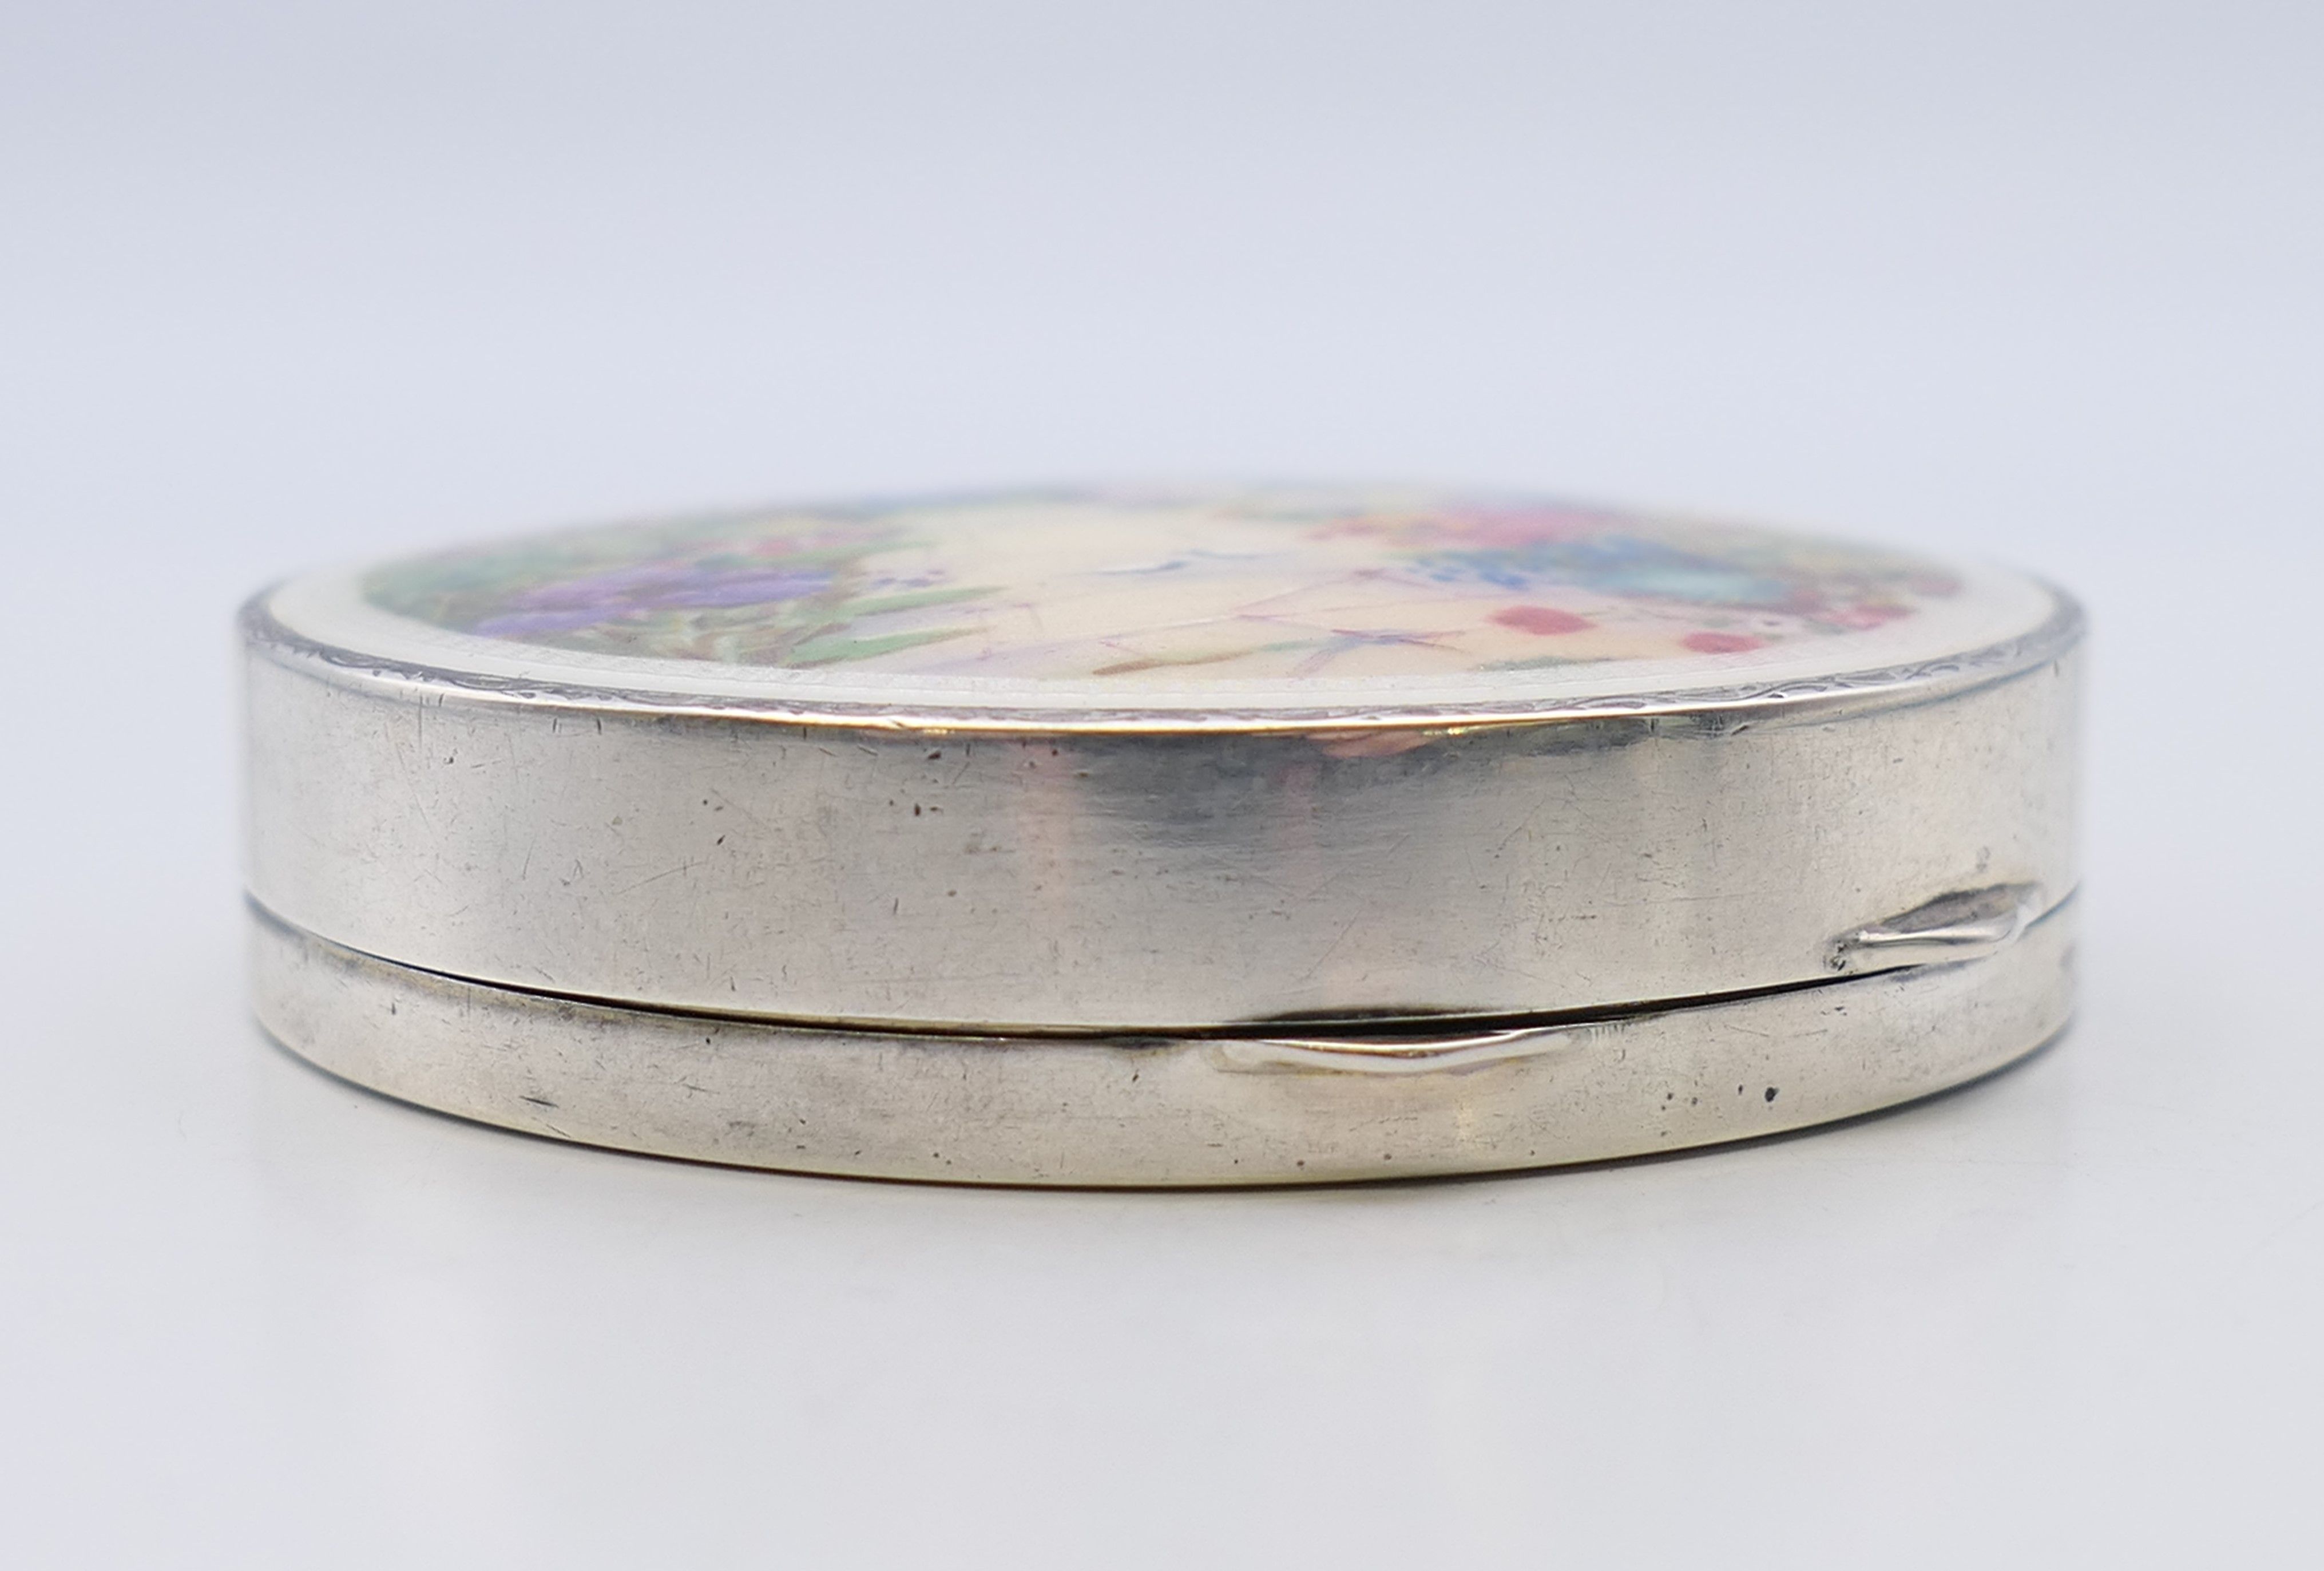 An early 20th century silver and enamel compact, the lid decorated with a floral garden scene. - Image 3 of 6